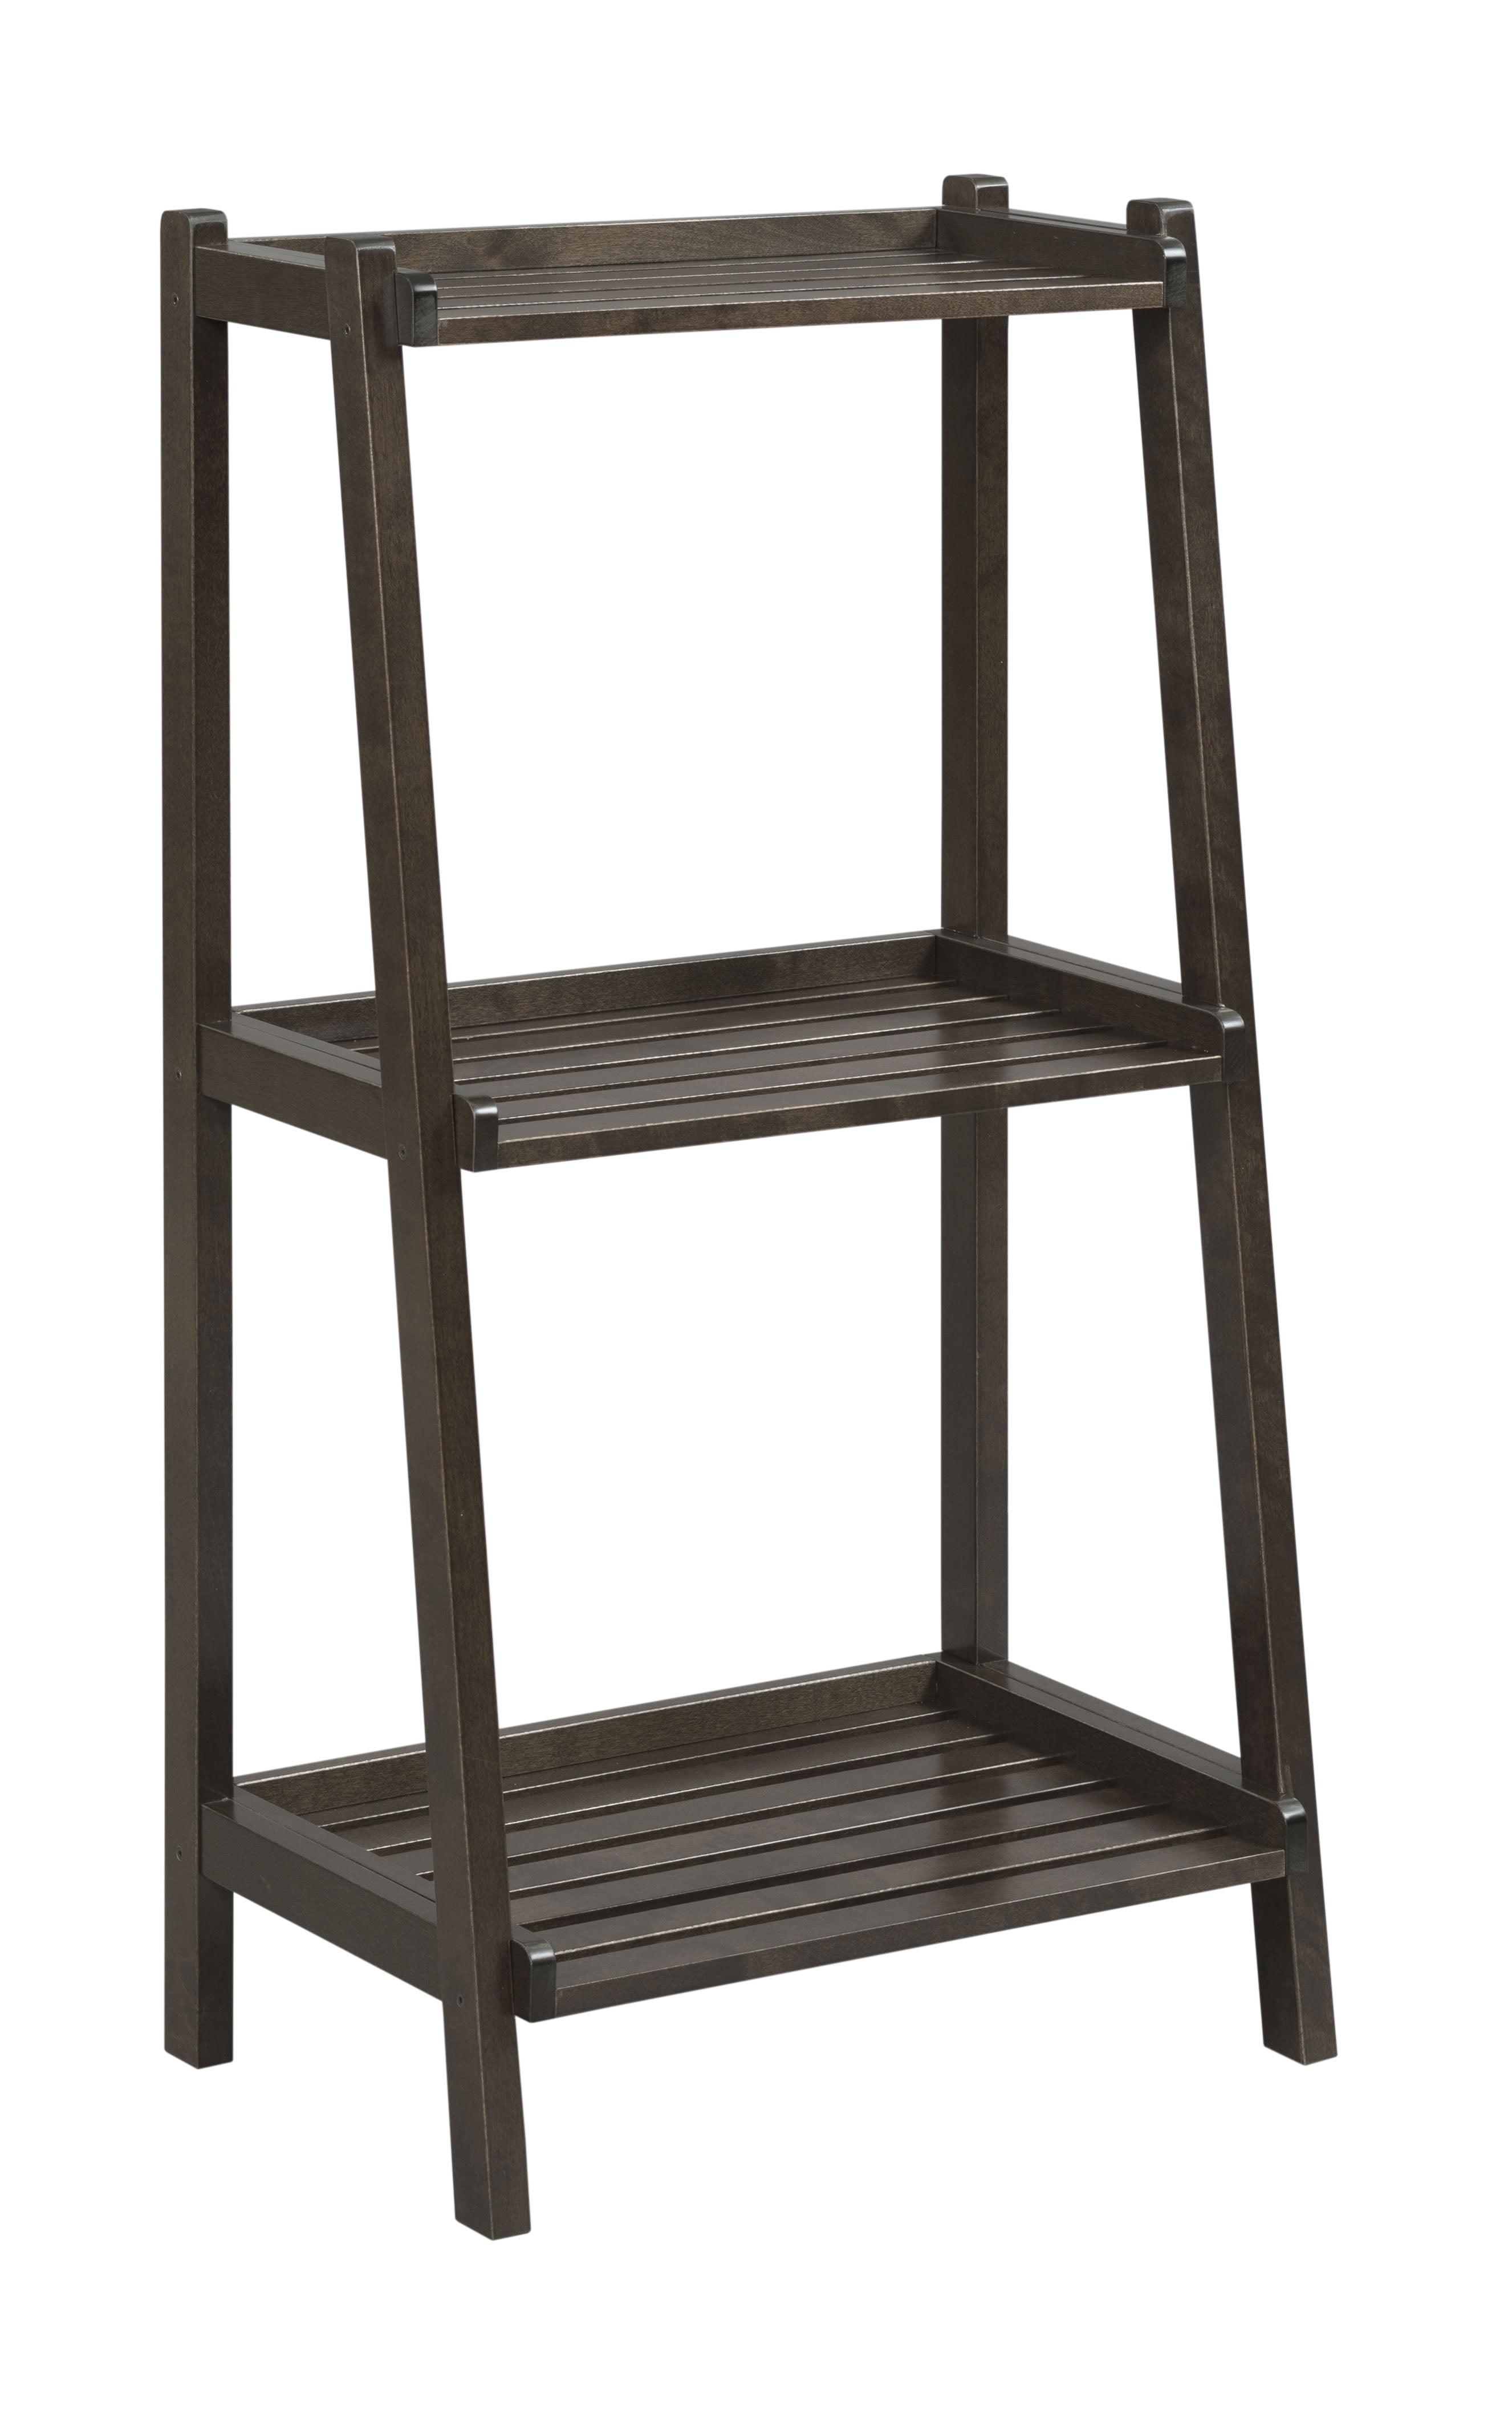 Espresso Solid Wood 3-Tier Ladder Bookshelf for Tight Spaces